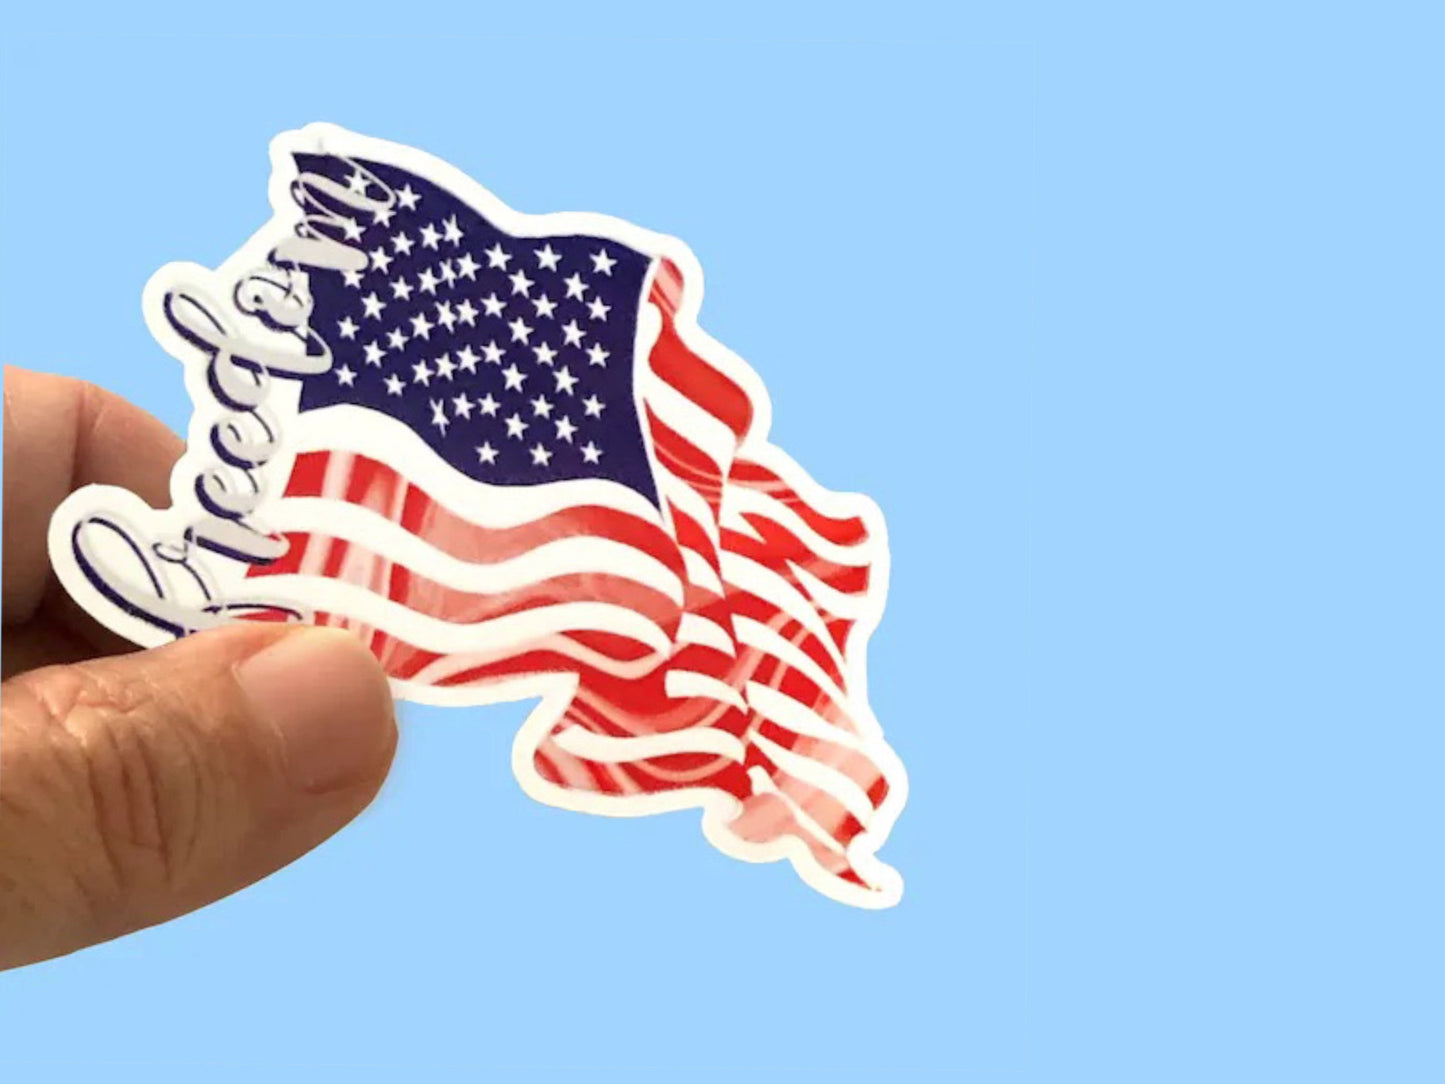 American Flag, Freedom Sticker Waterproof Sticker - Use for Laptops, Water Bottles, Candle Jars and other smooth surfaces